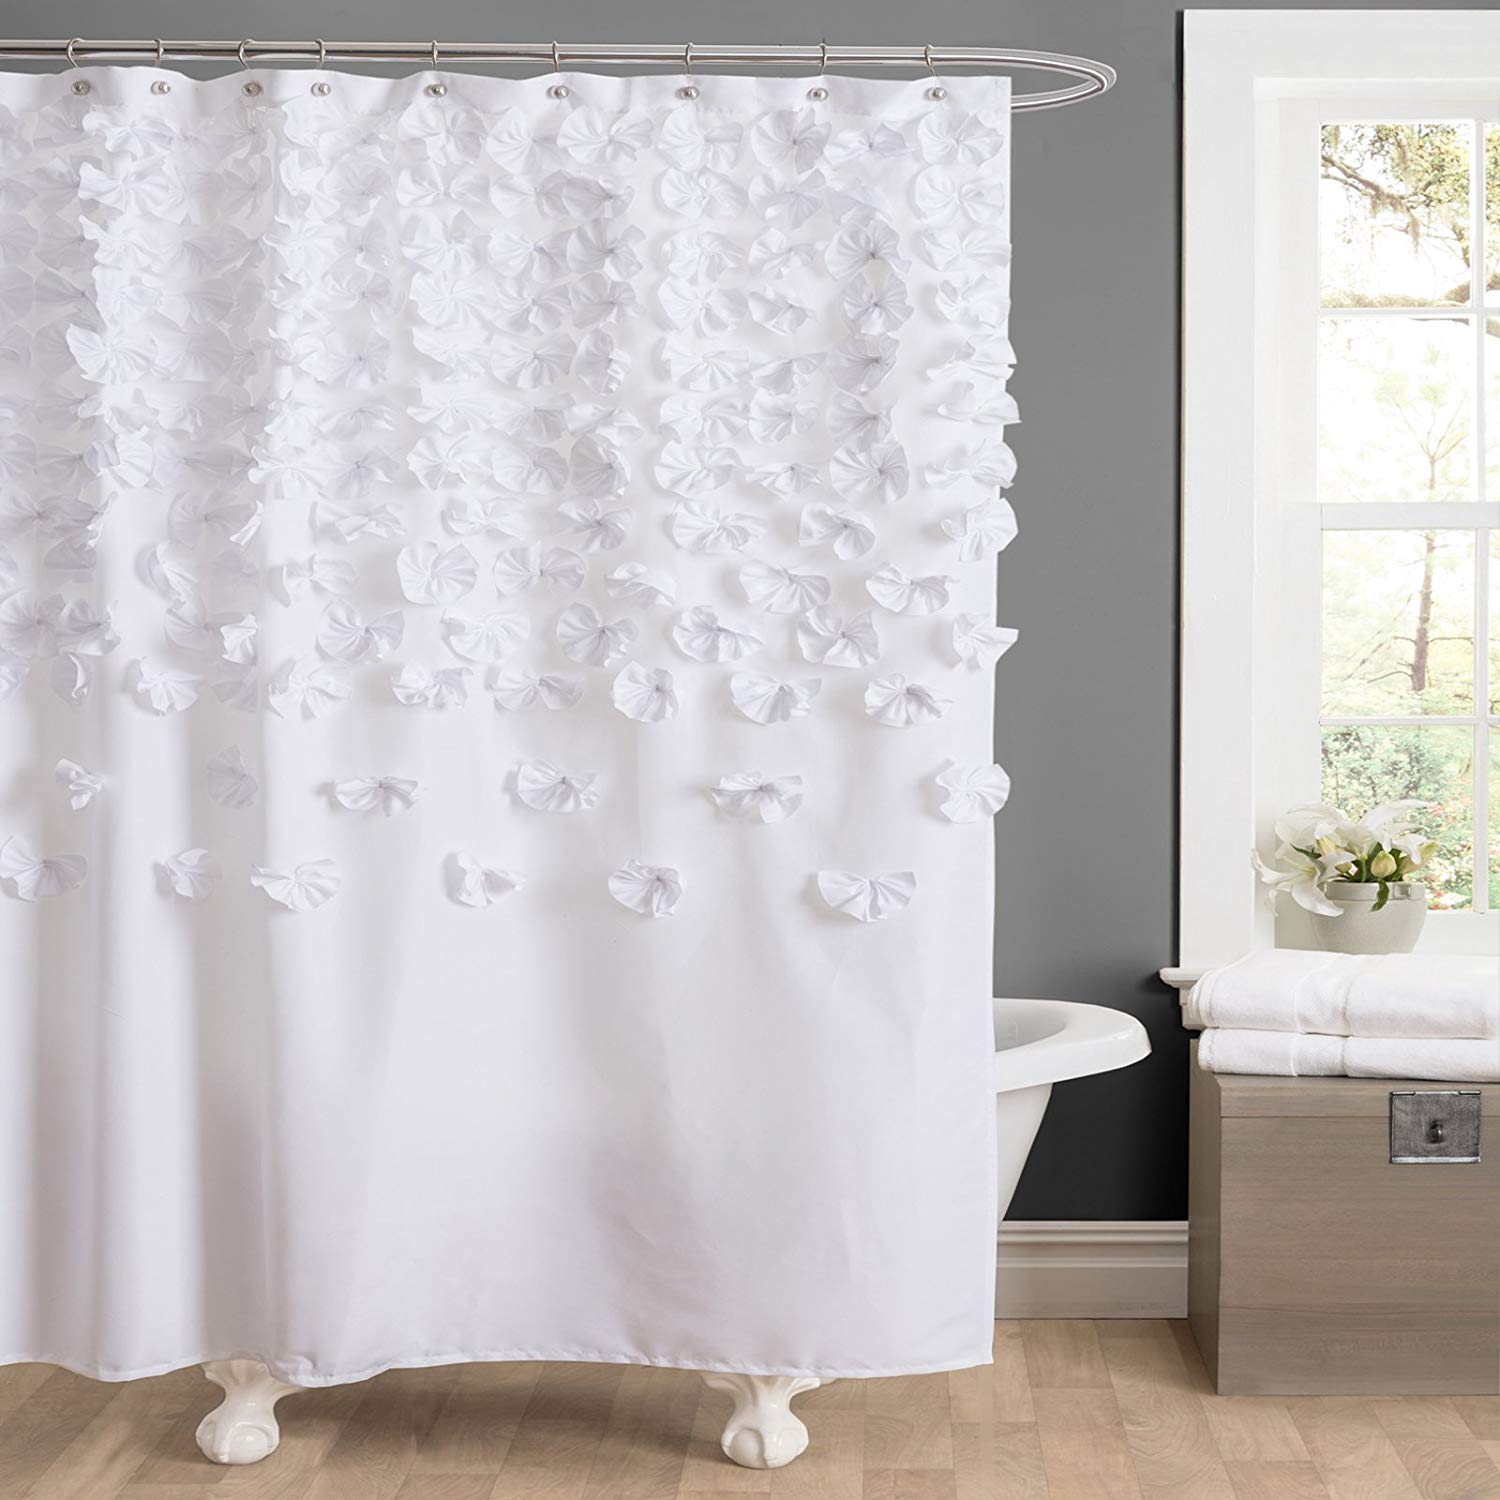 amazon.com: lush decor lucia shower curtain, 72 by 72-inch, white: home MMSICDY